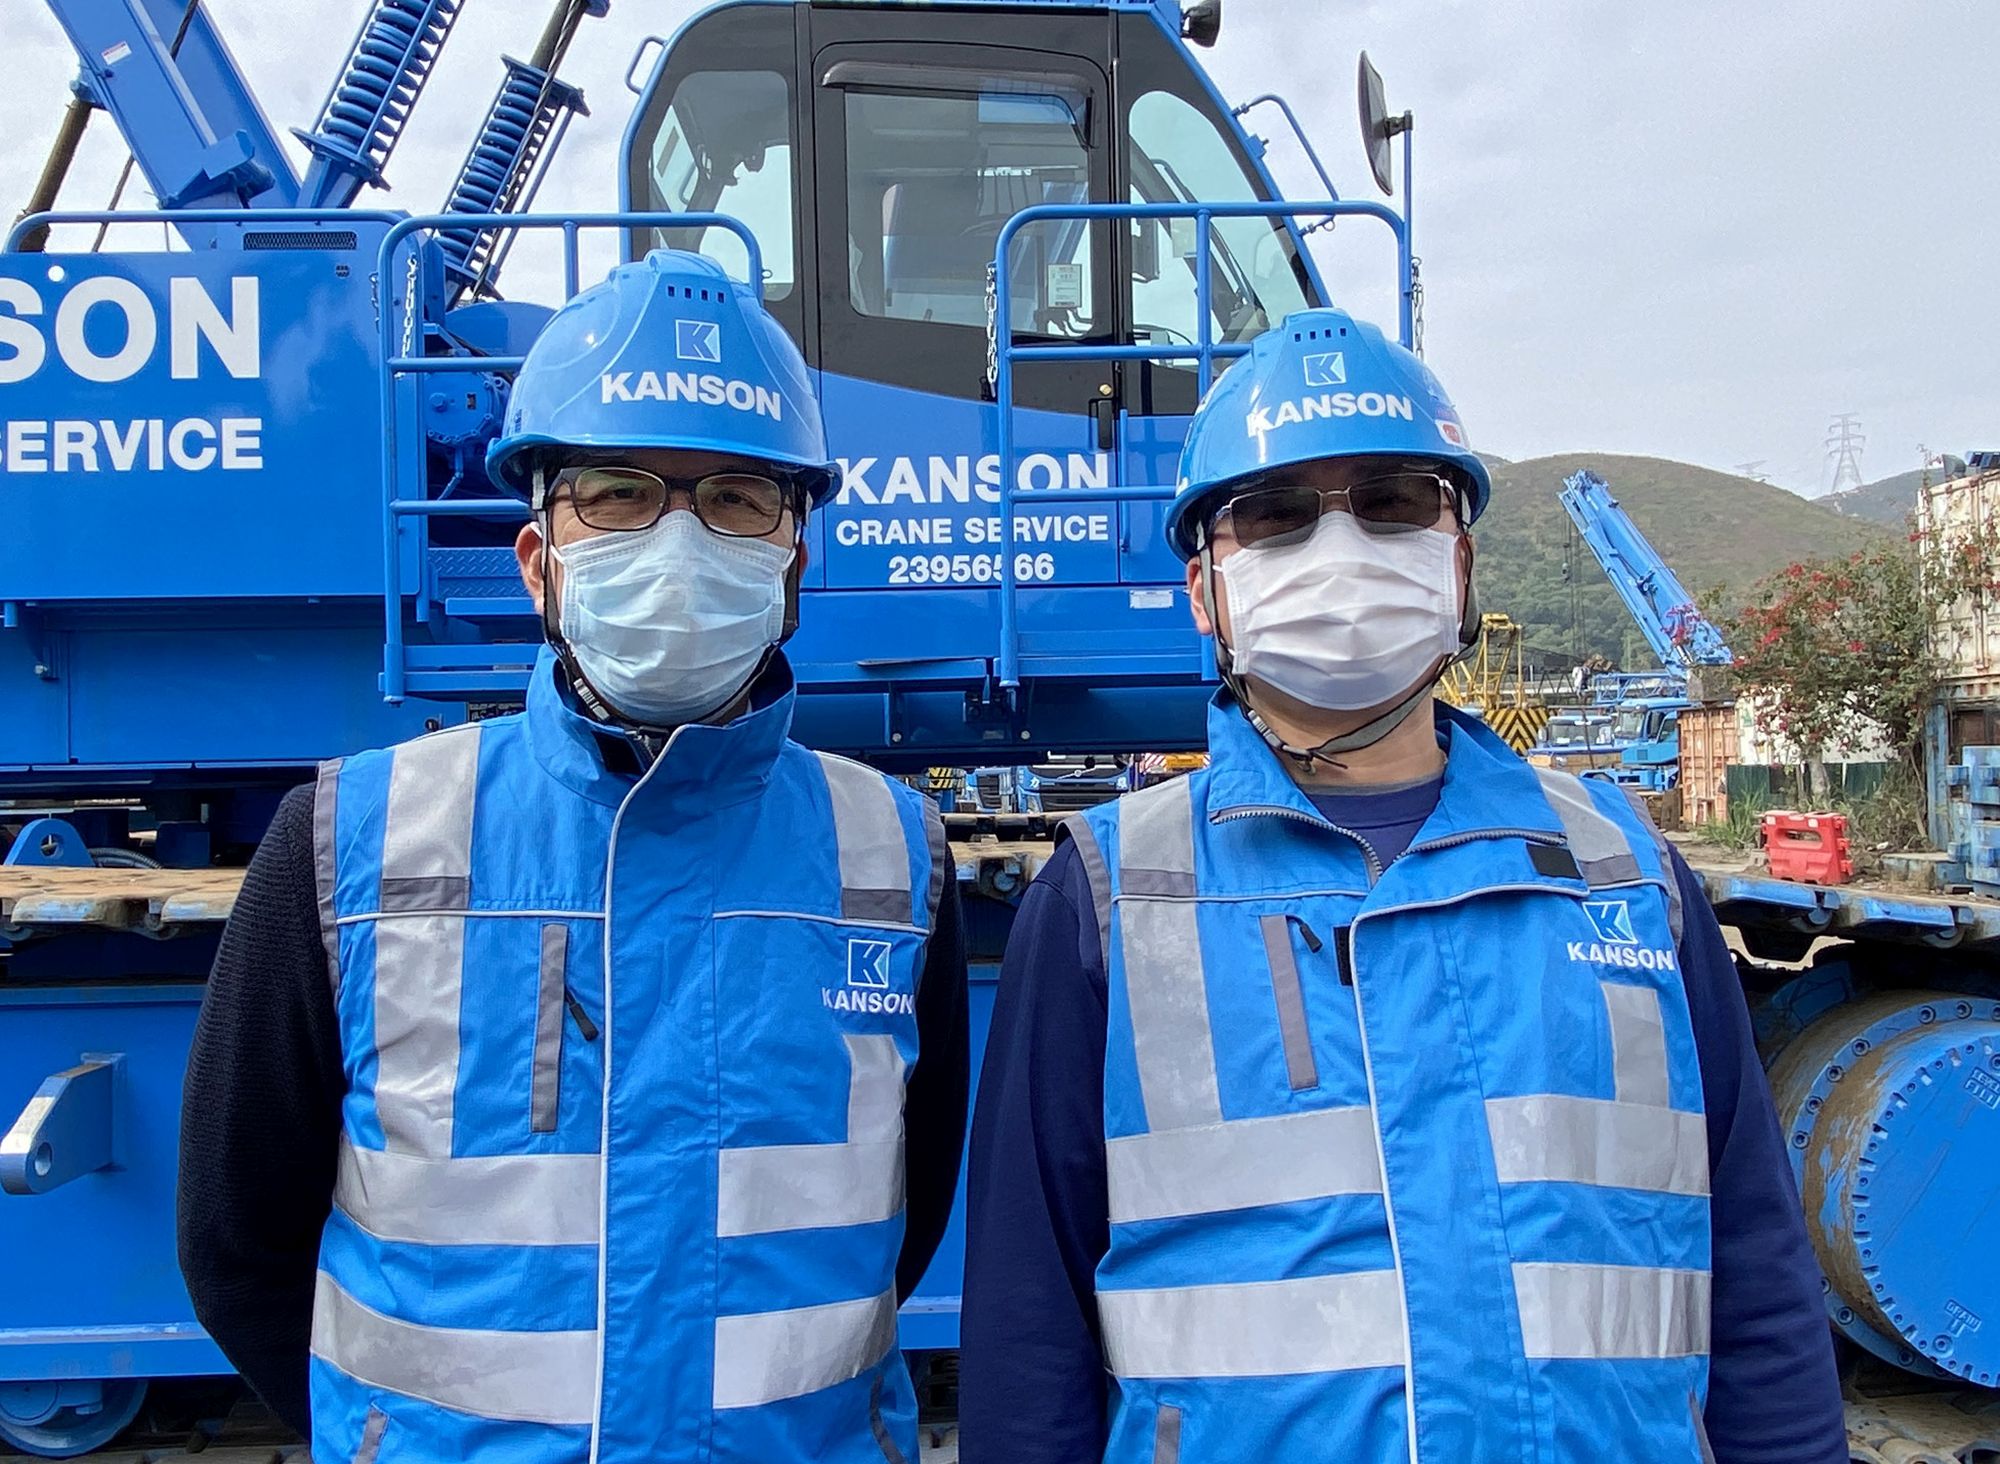 Mr KAN (left) and Mr TONG (right), operators of a storage yard for construction equipment, say that they have submitted planning application to the Town Planning Board and obtained planning approval with the assistance of the DEVB. They are looking forward to continuing their operation at the new site at the soonest.